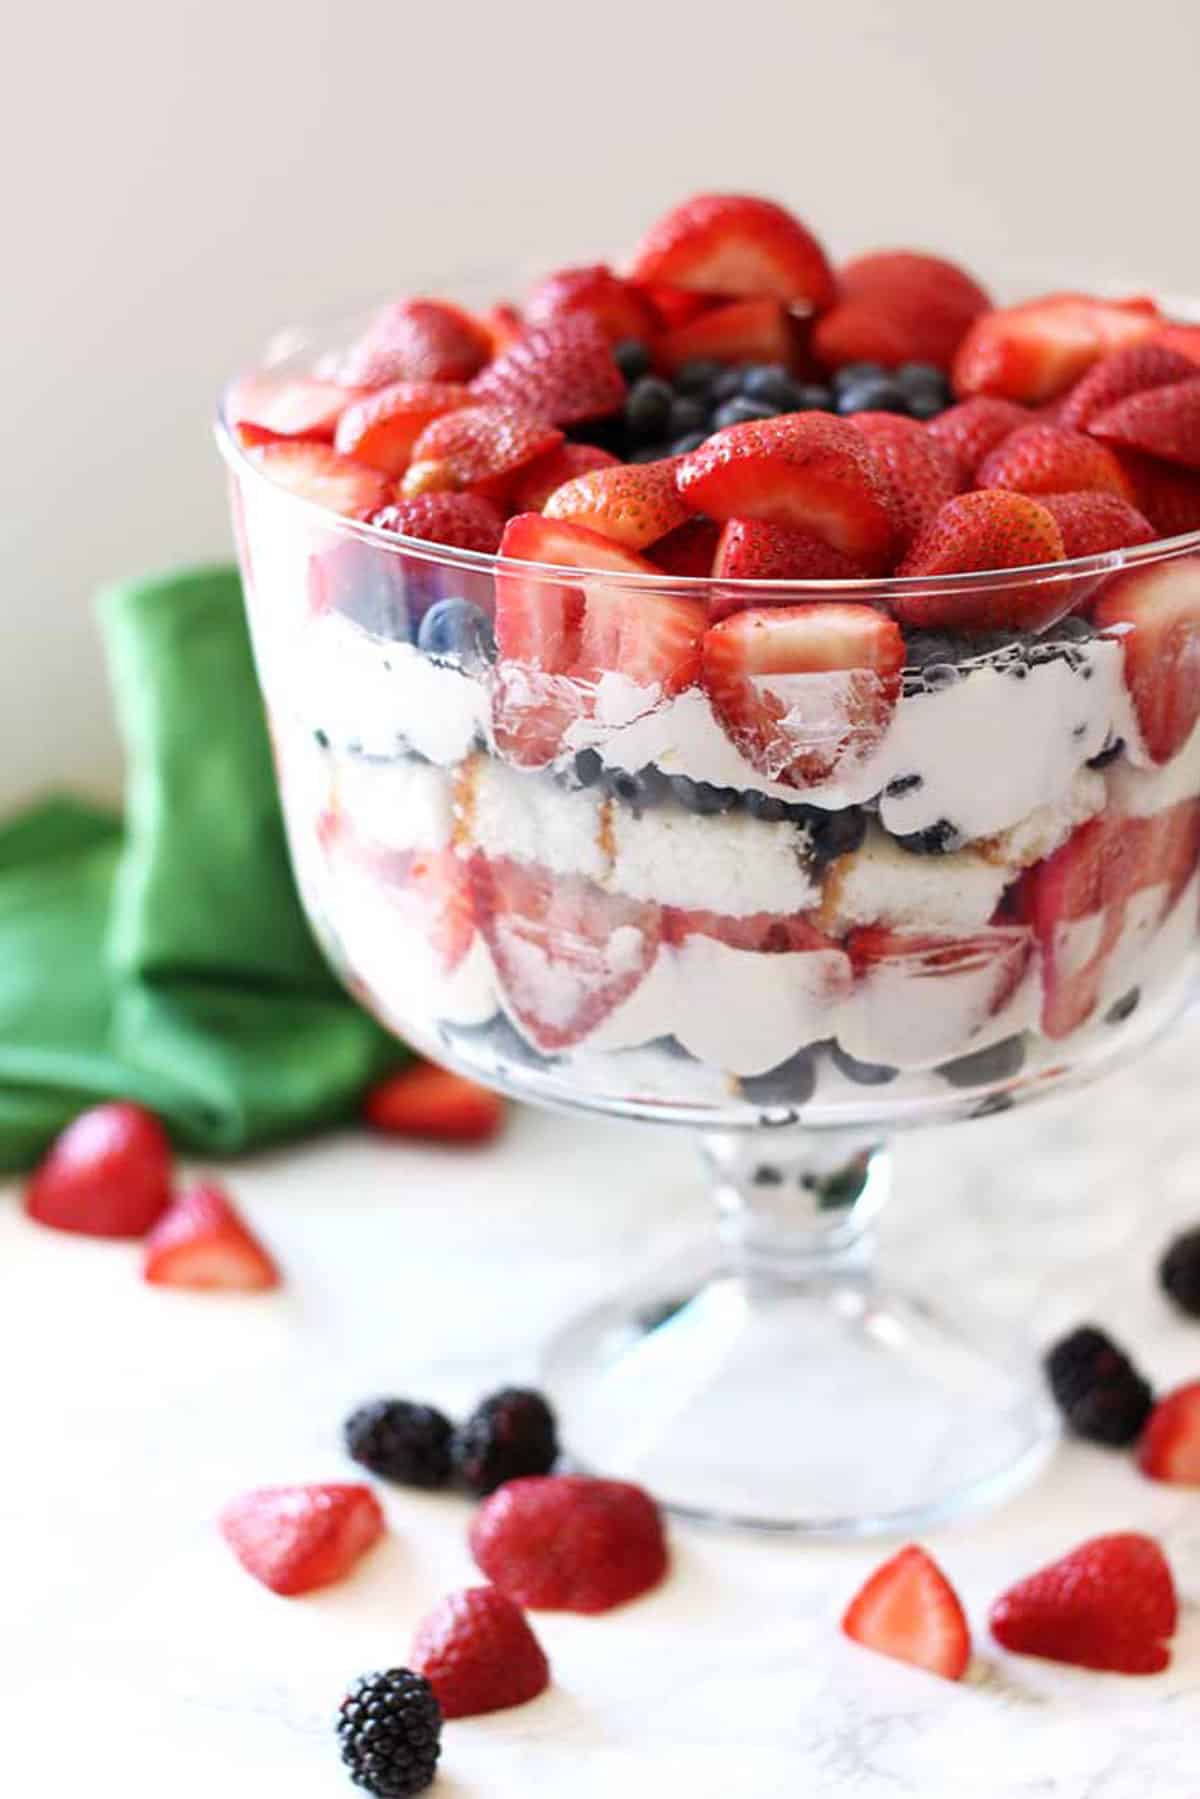 Strawberries, Blueberries and angel food cake with a whipped cream cheesecake filling in a trifle bowl.